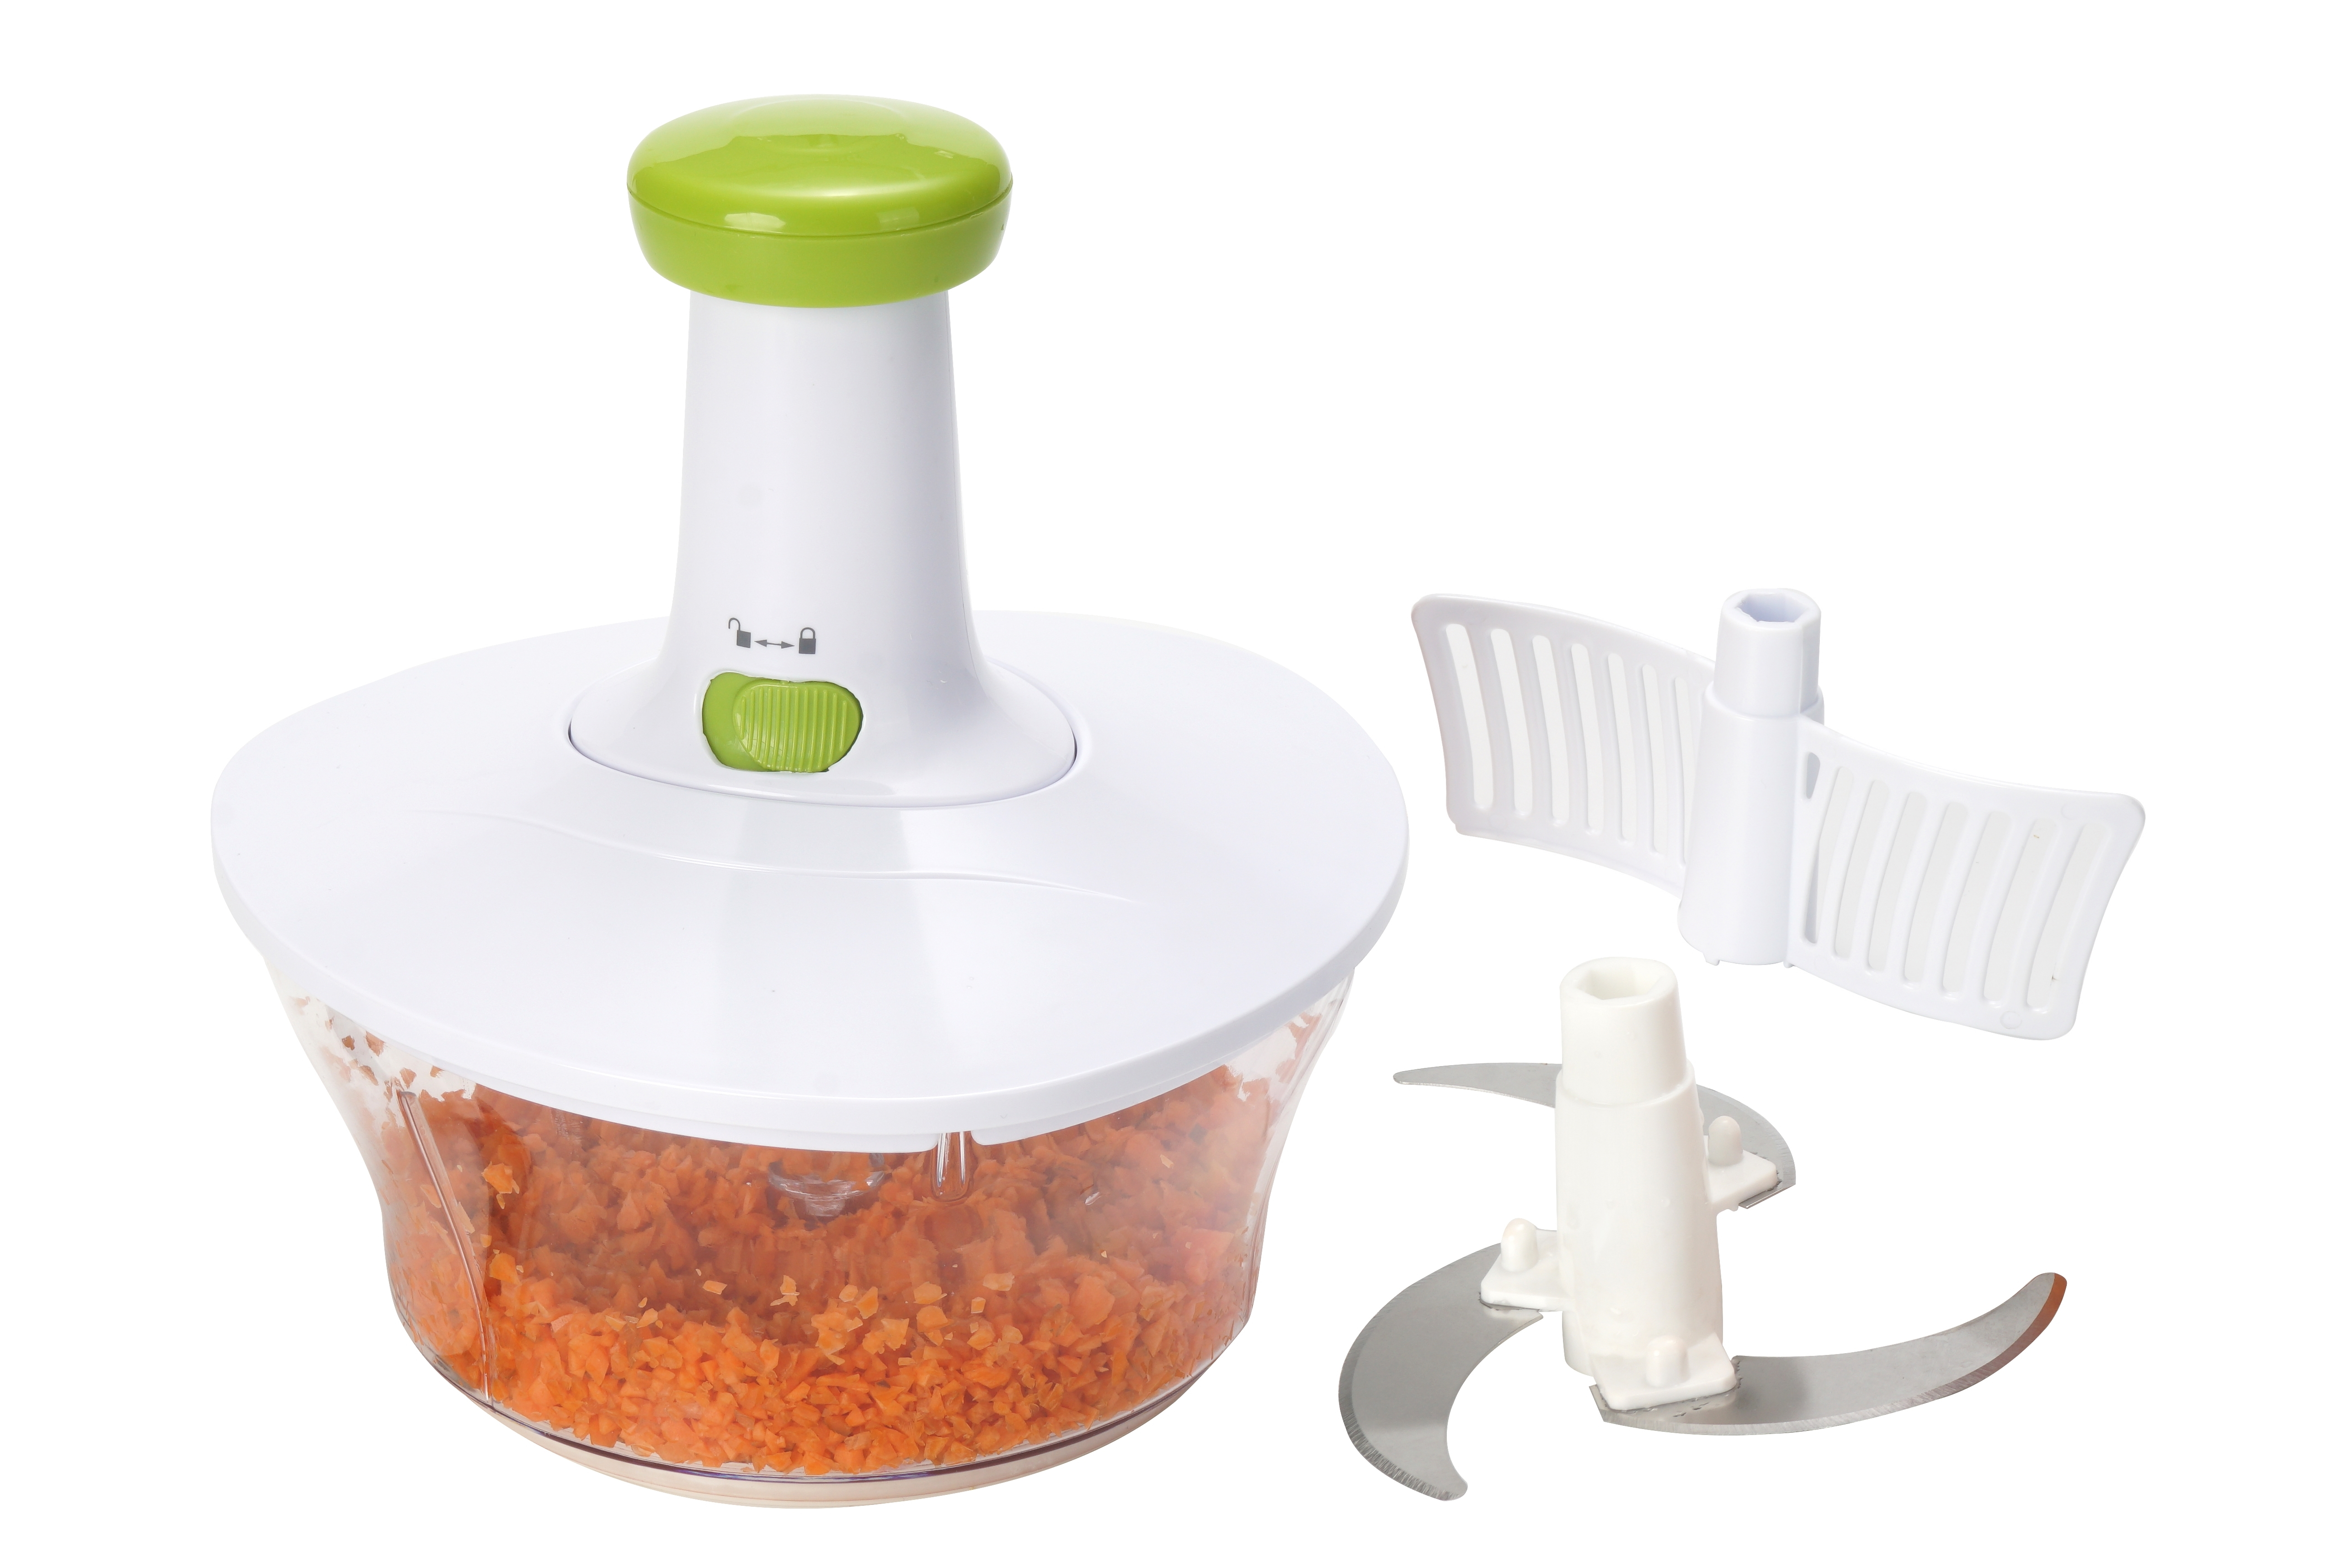 Brieftons Manual Food Chopper, Compact & Powerful Hand Held